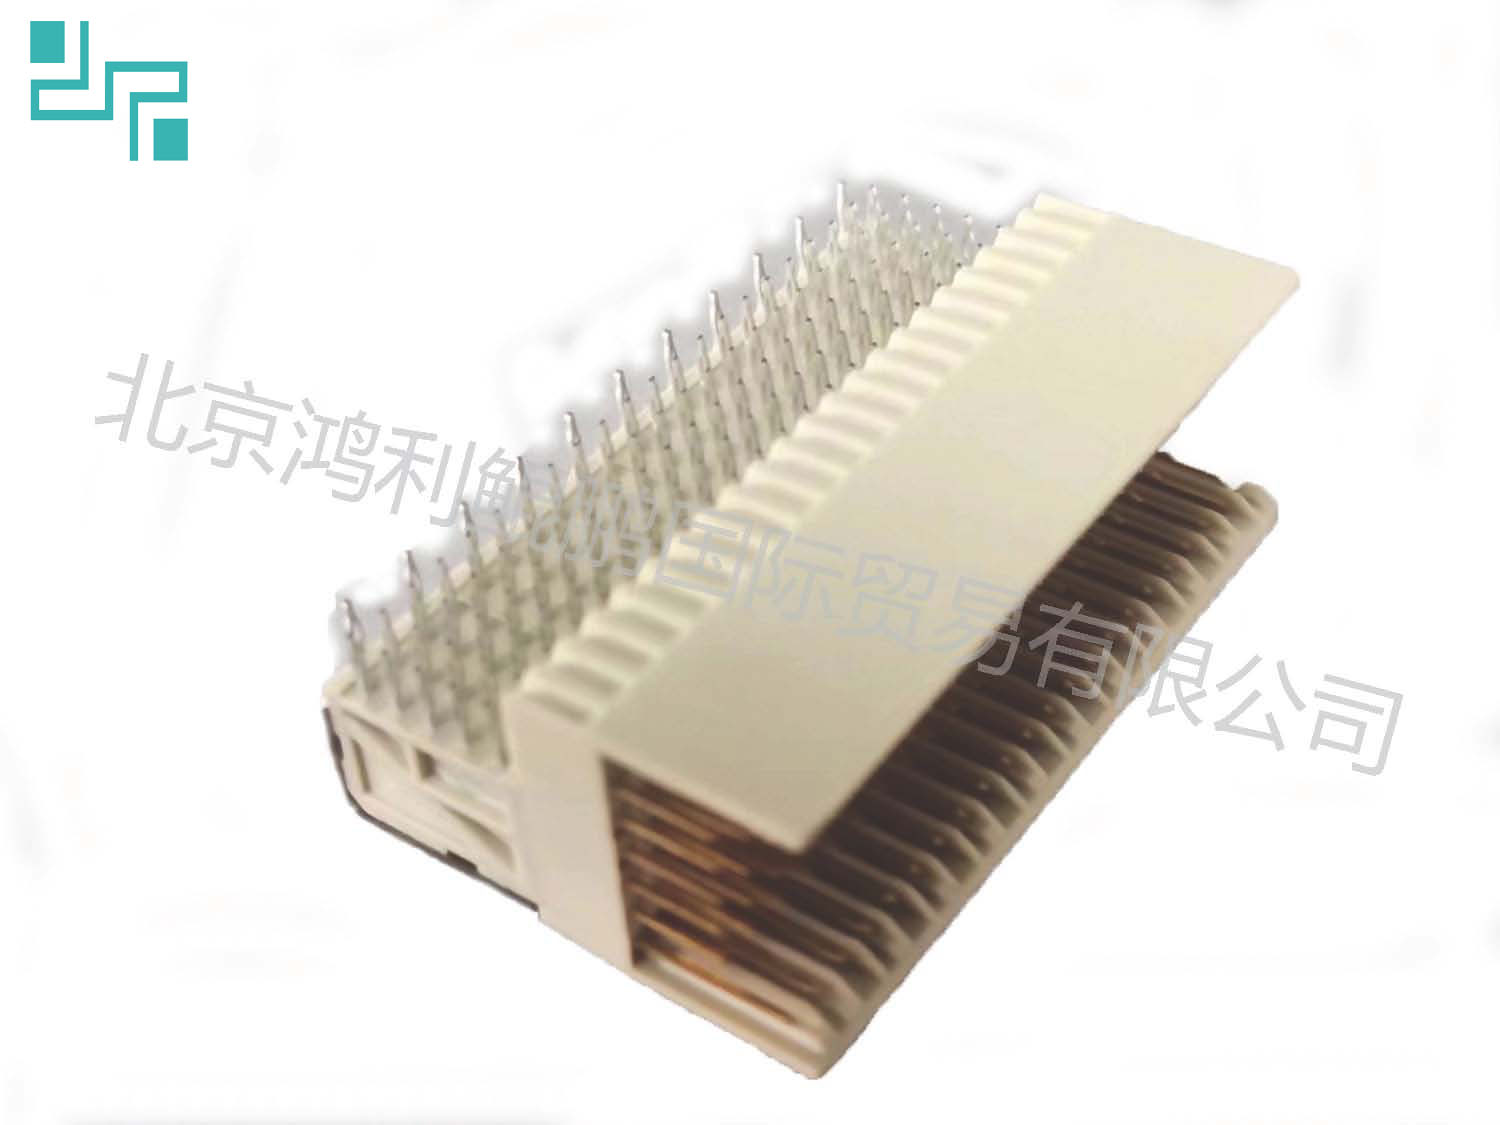 2mm connector -CPCI series